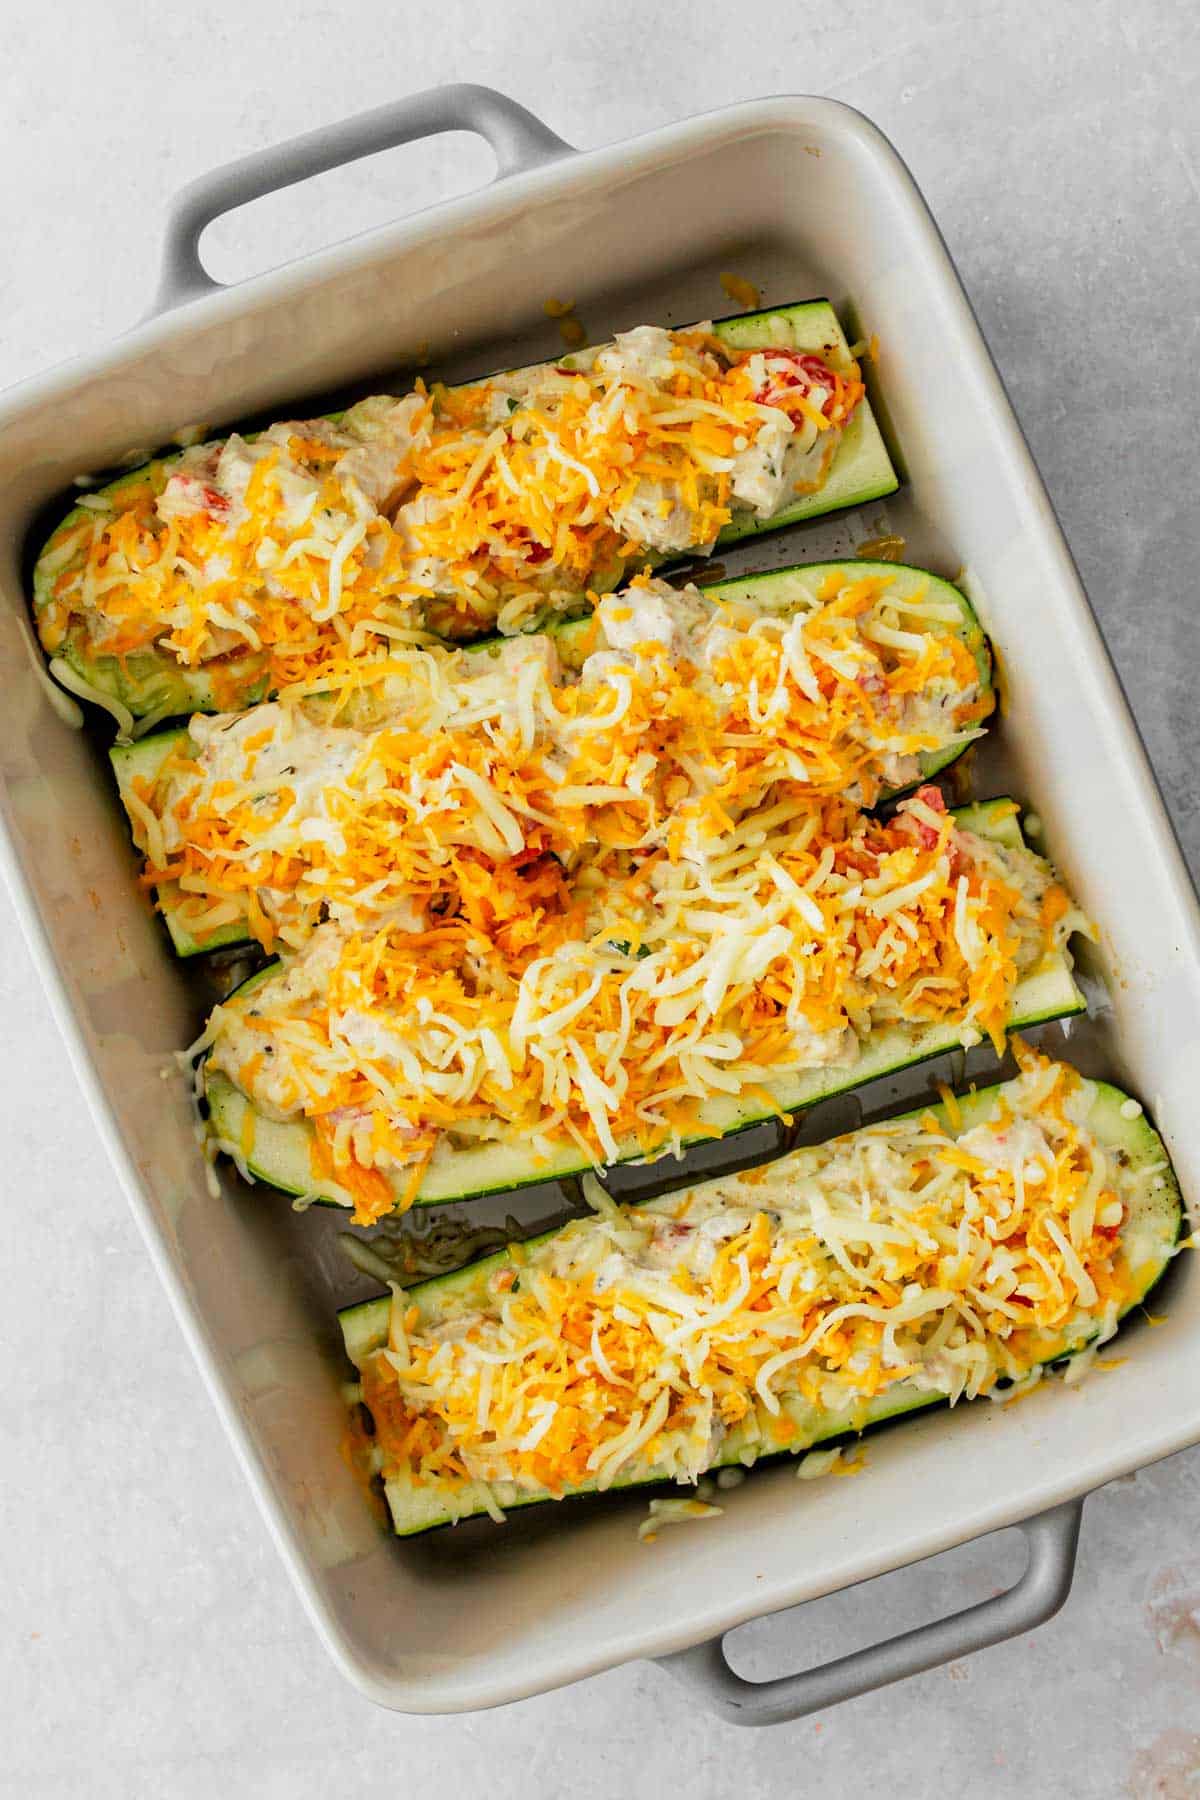 Zucchini Boats With Chicken before baking